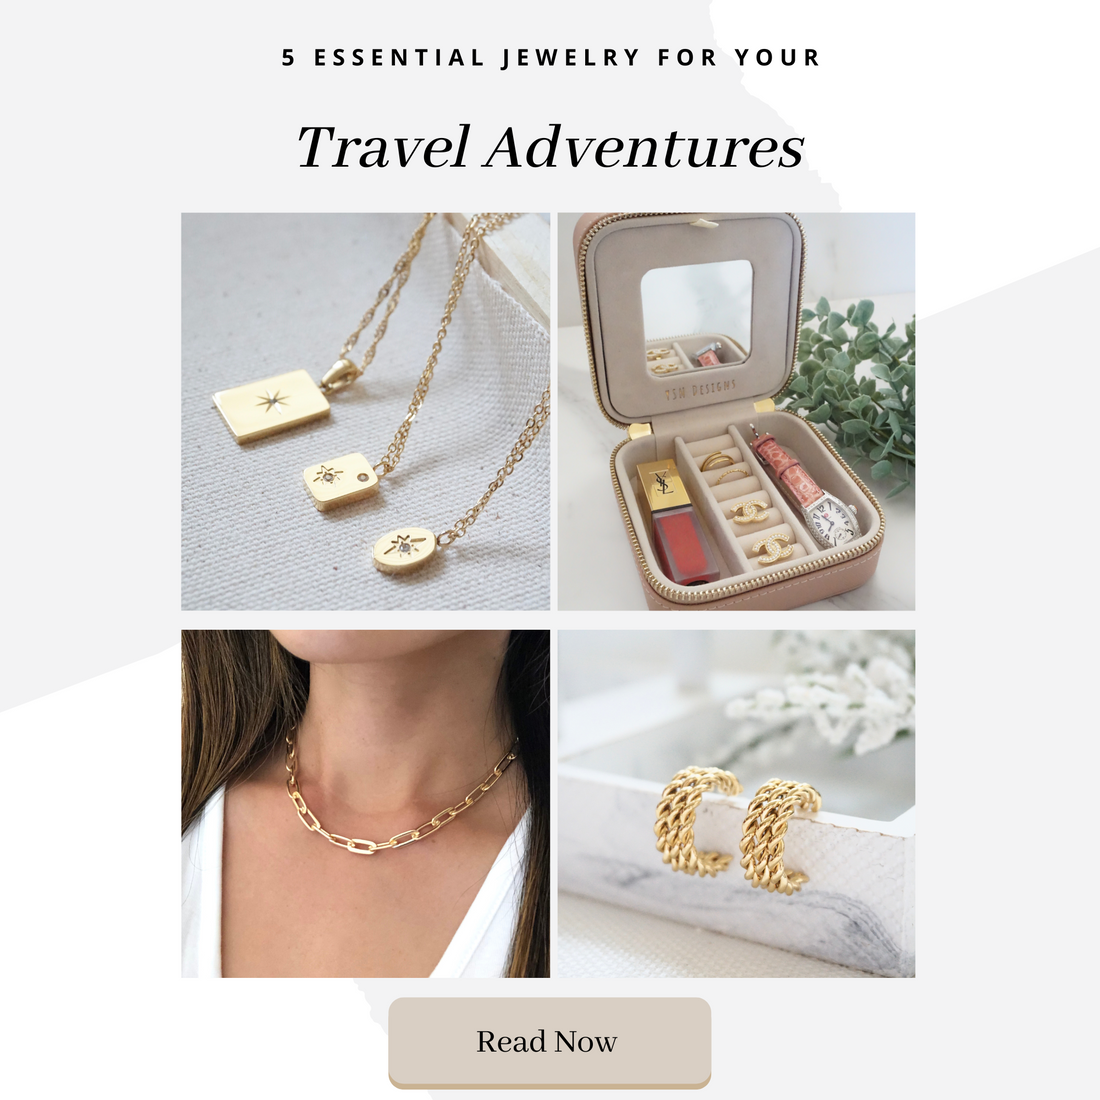 5 pieces of jewelry to take on your travel